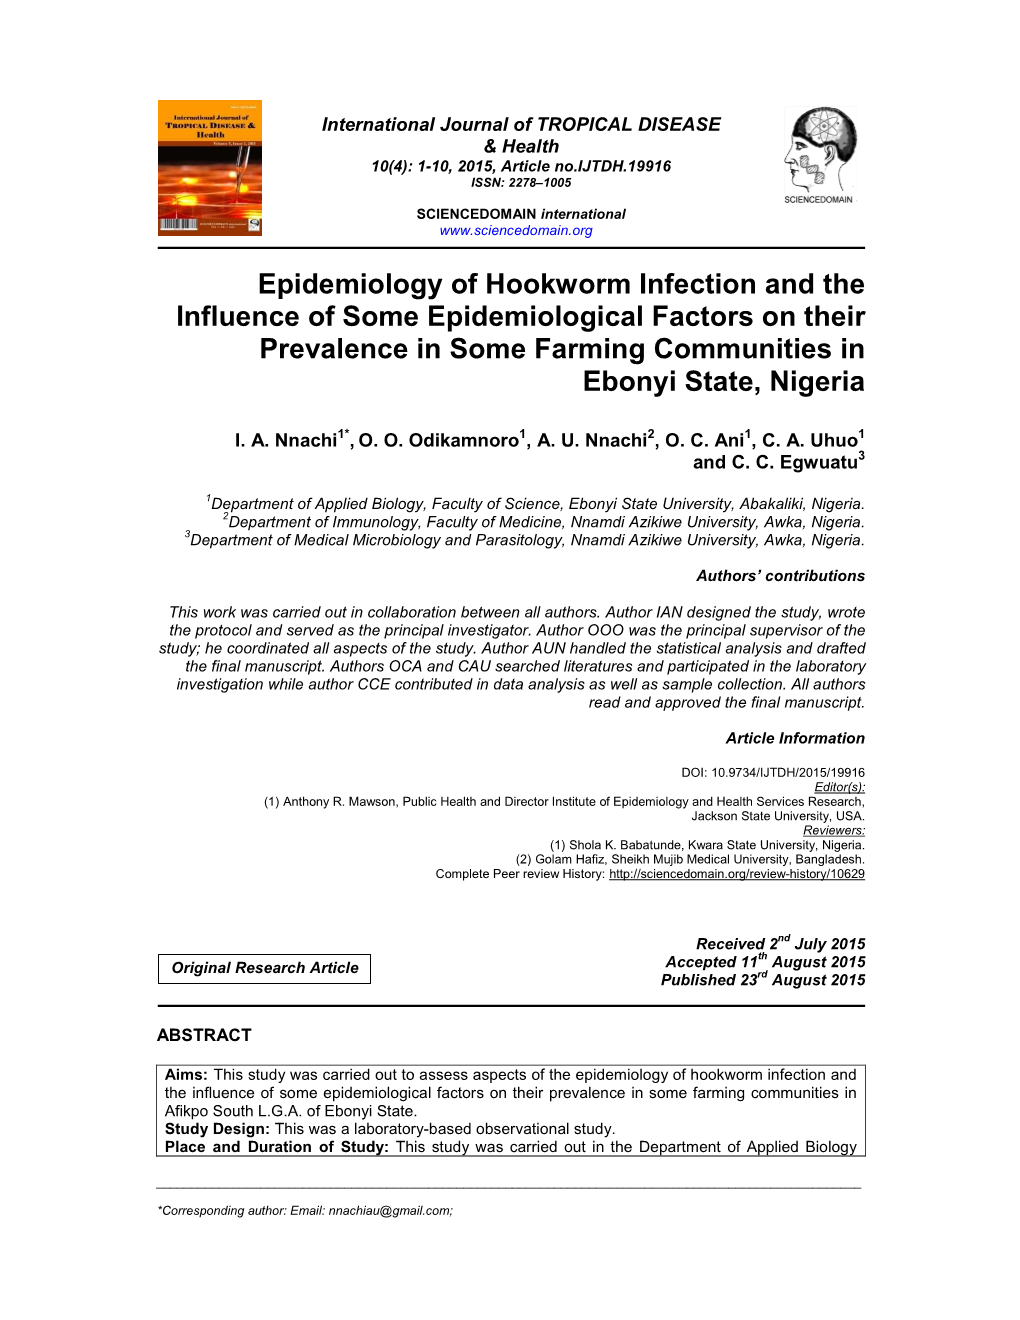 Epidemiology of Hookworm Infection and the Influence of Some Epidemiological Factors on Their Prevalence in Some Farming Communities in Ebonyi State, Nigeria